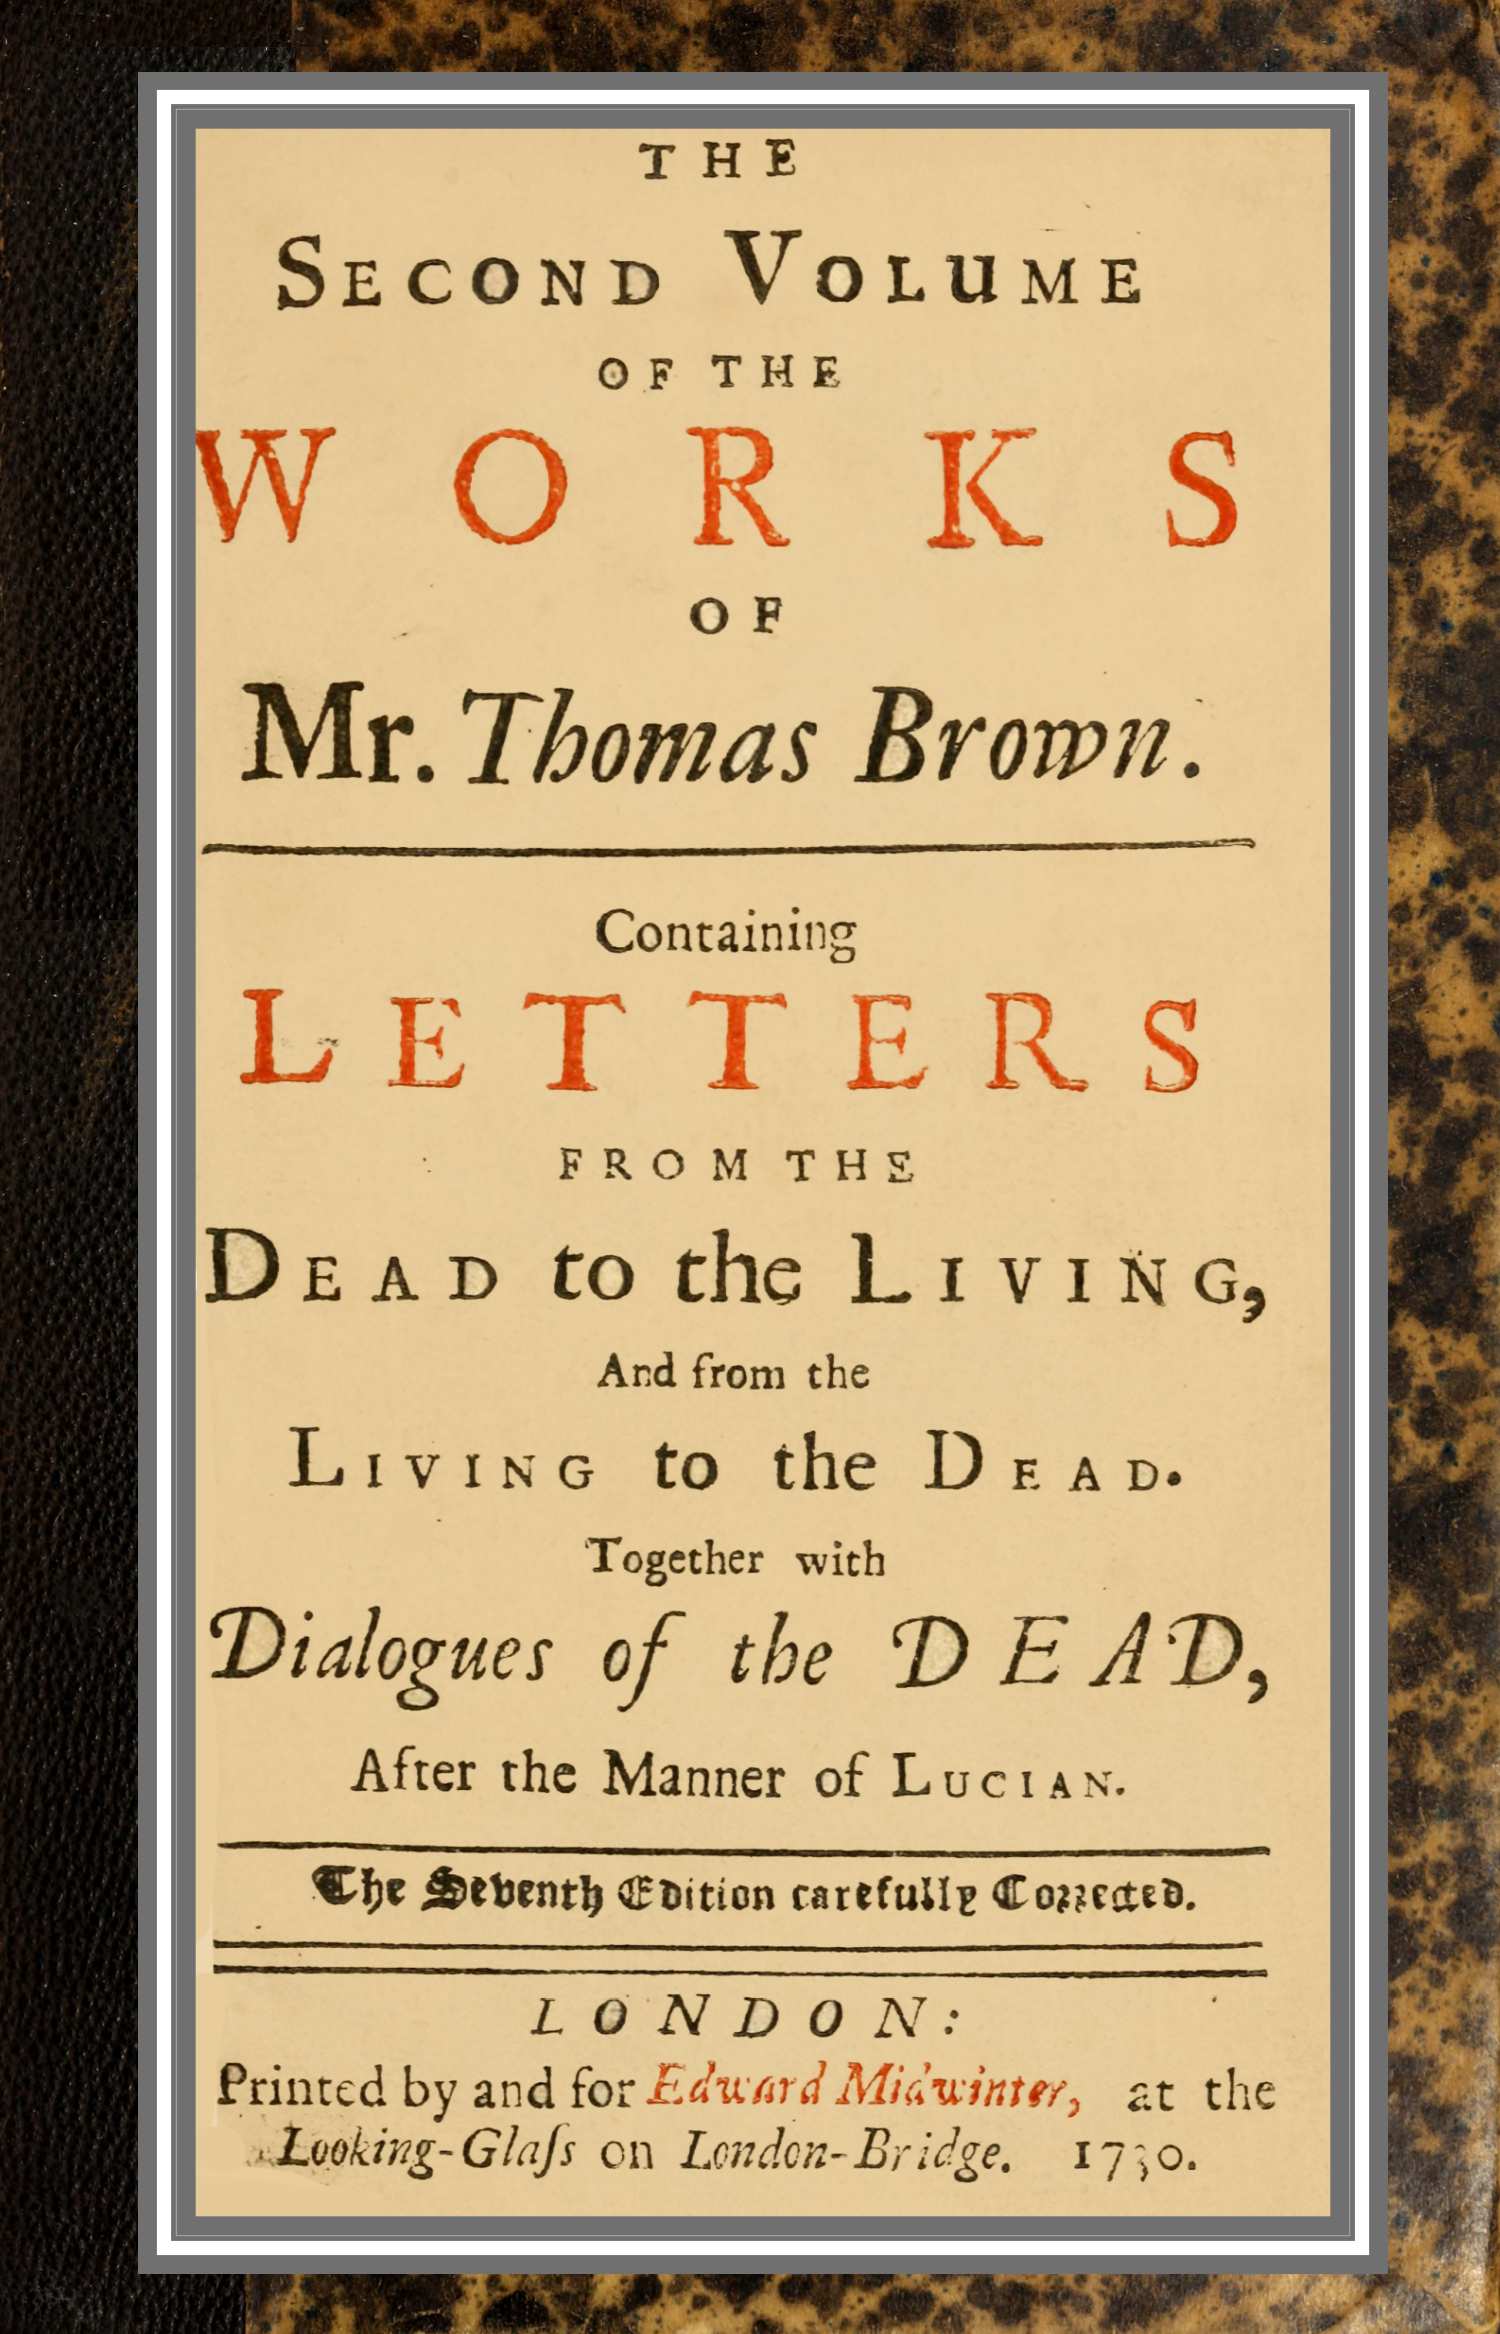 The Project Gutenberg eBook of The second volume of the works of Mr Thomas Brown. picture